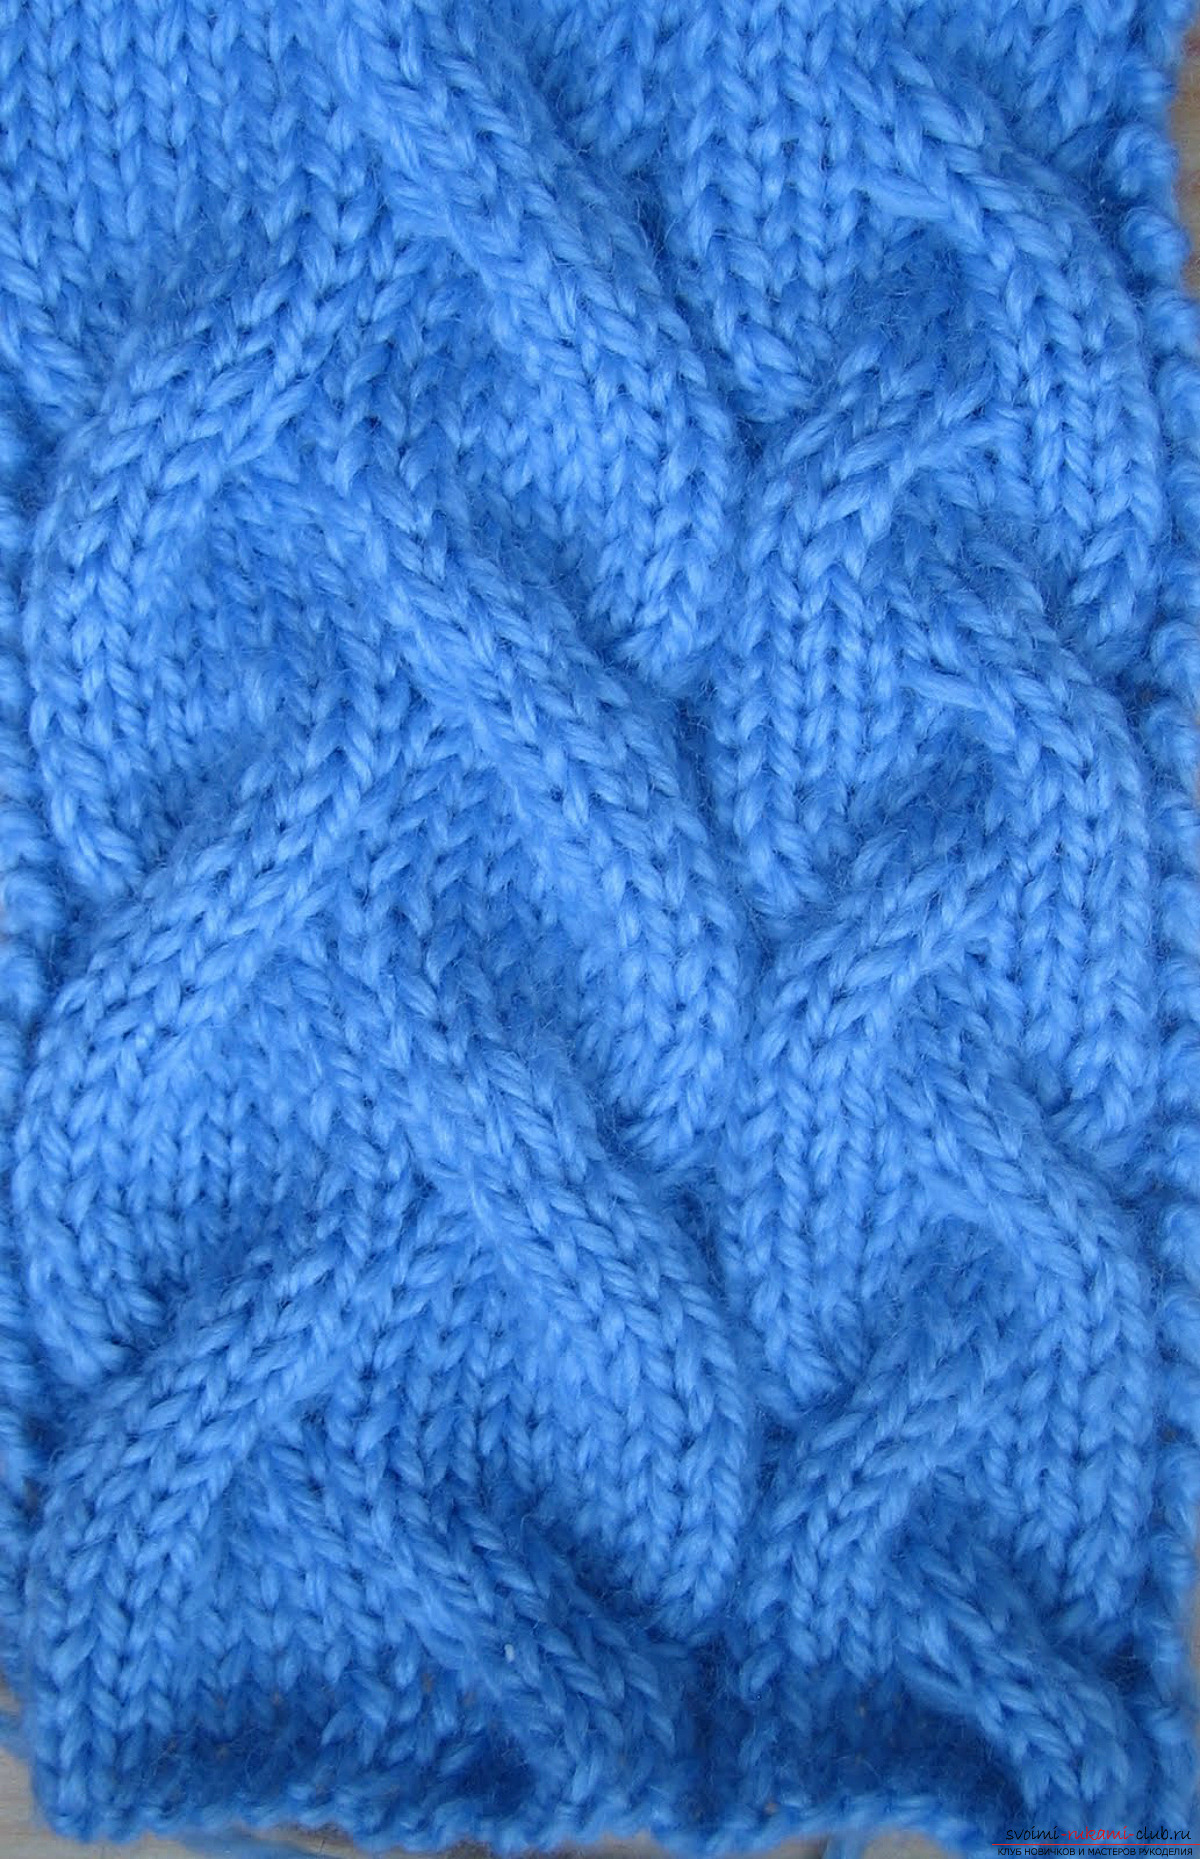 knitted patterns of braid. Photo №1